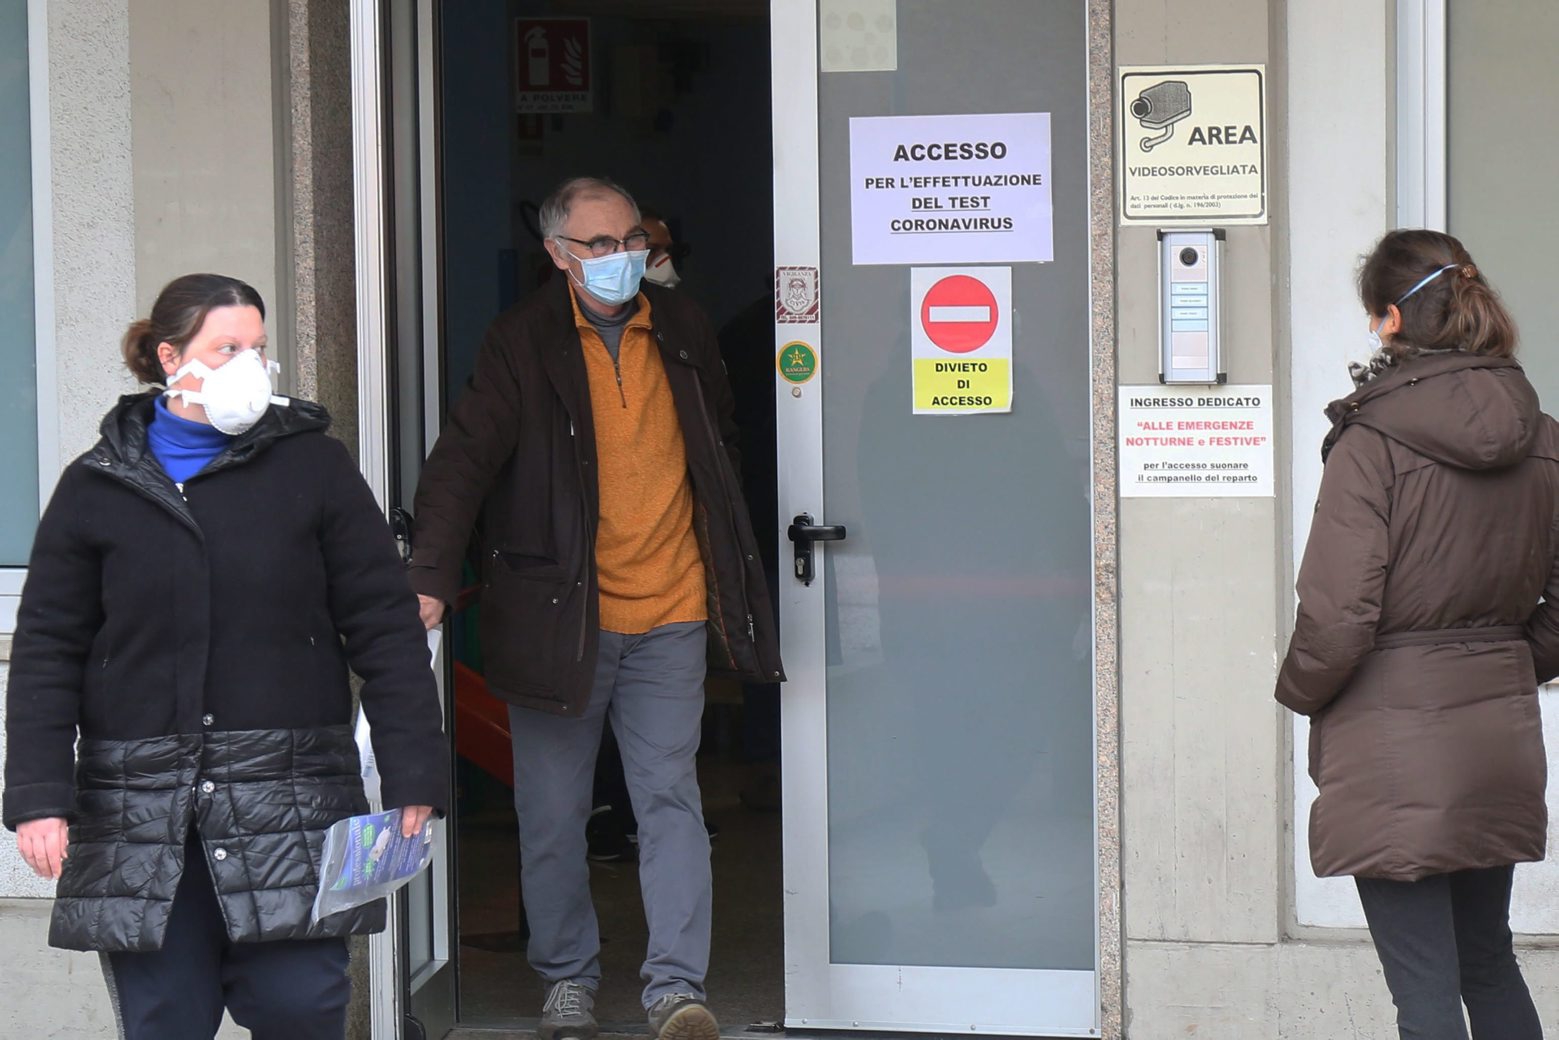 epa08252391 Visitors wearing protective face masks at the entrance of the hospital in Padua, northern Italy, 27 February 2020. The number of people infected with the novel coronavirus (Covid-19) disease who have died in Italy has risen to 14, as the number of infected cases reached 528, Head of the Italian Civil Protection Borrelli said on the day.  EPA/NICOLA FOSSELLA ITALY HEALTH CORONAVIRUS COVID19